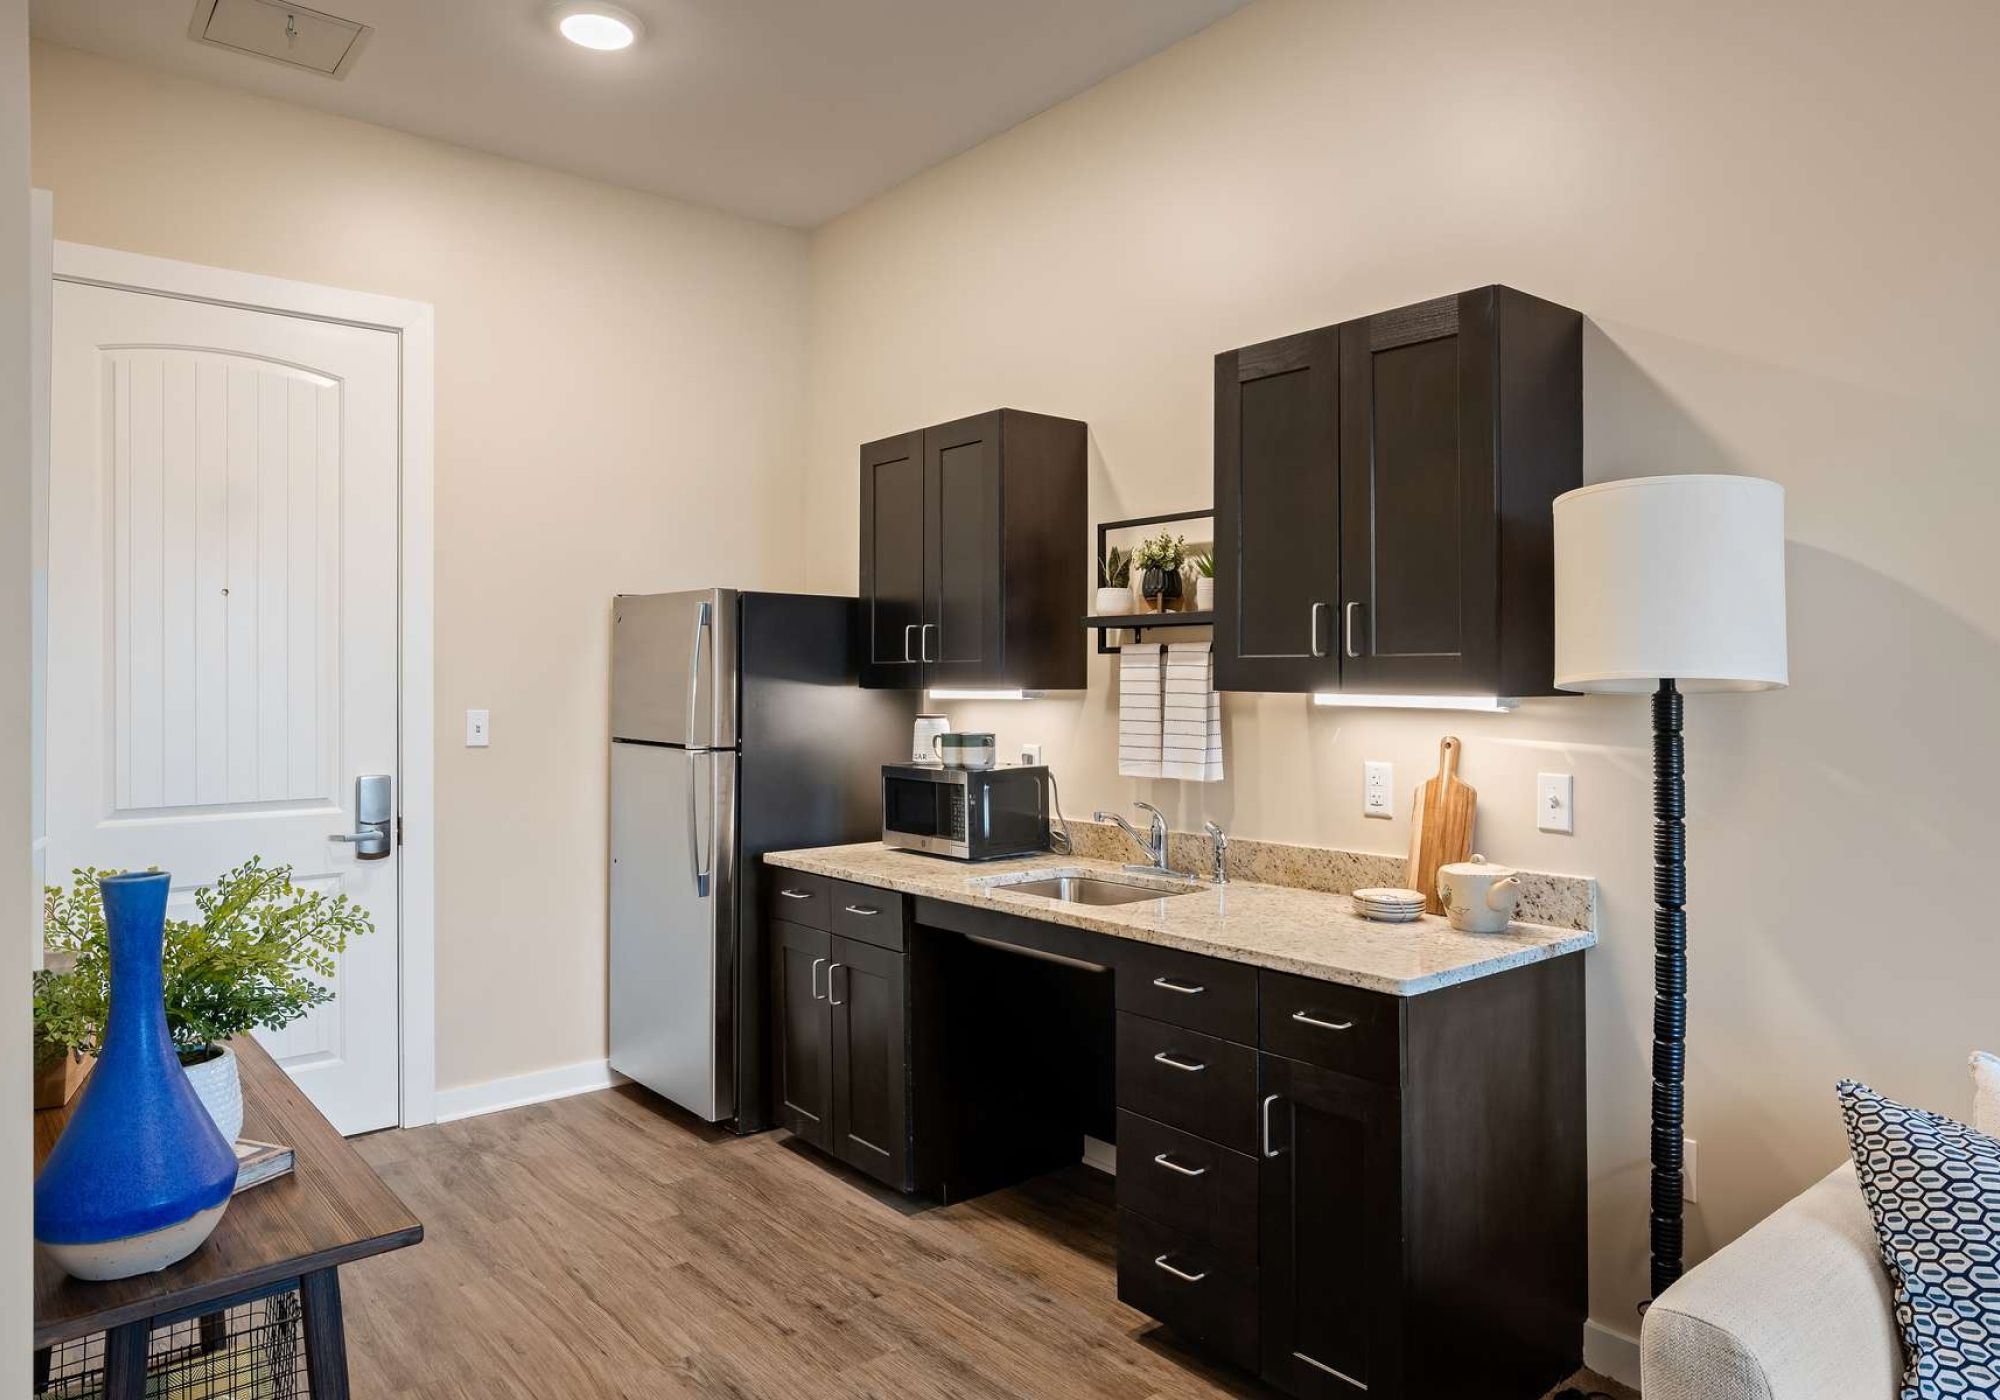 The Claiborne at Gulfport Highlands senior living community full kitchen with high-end finishes